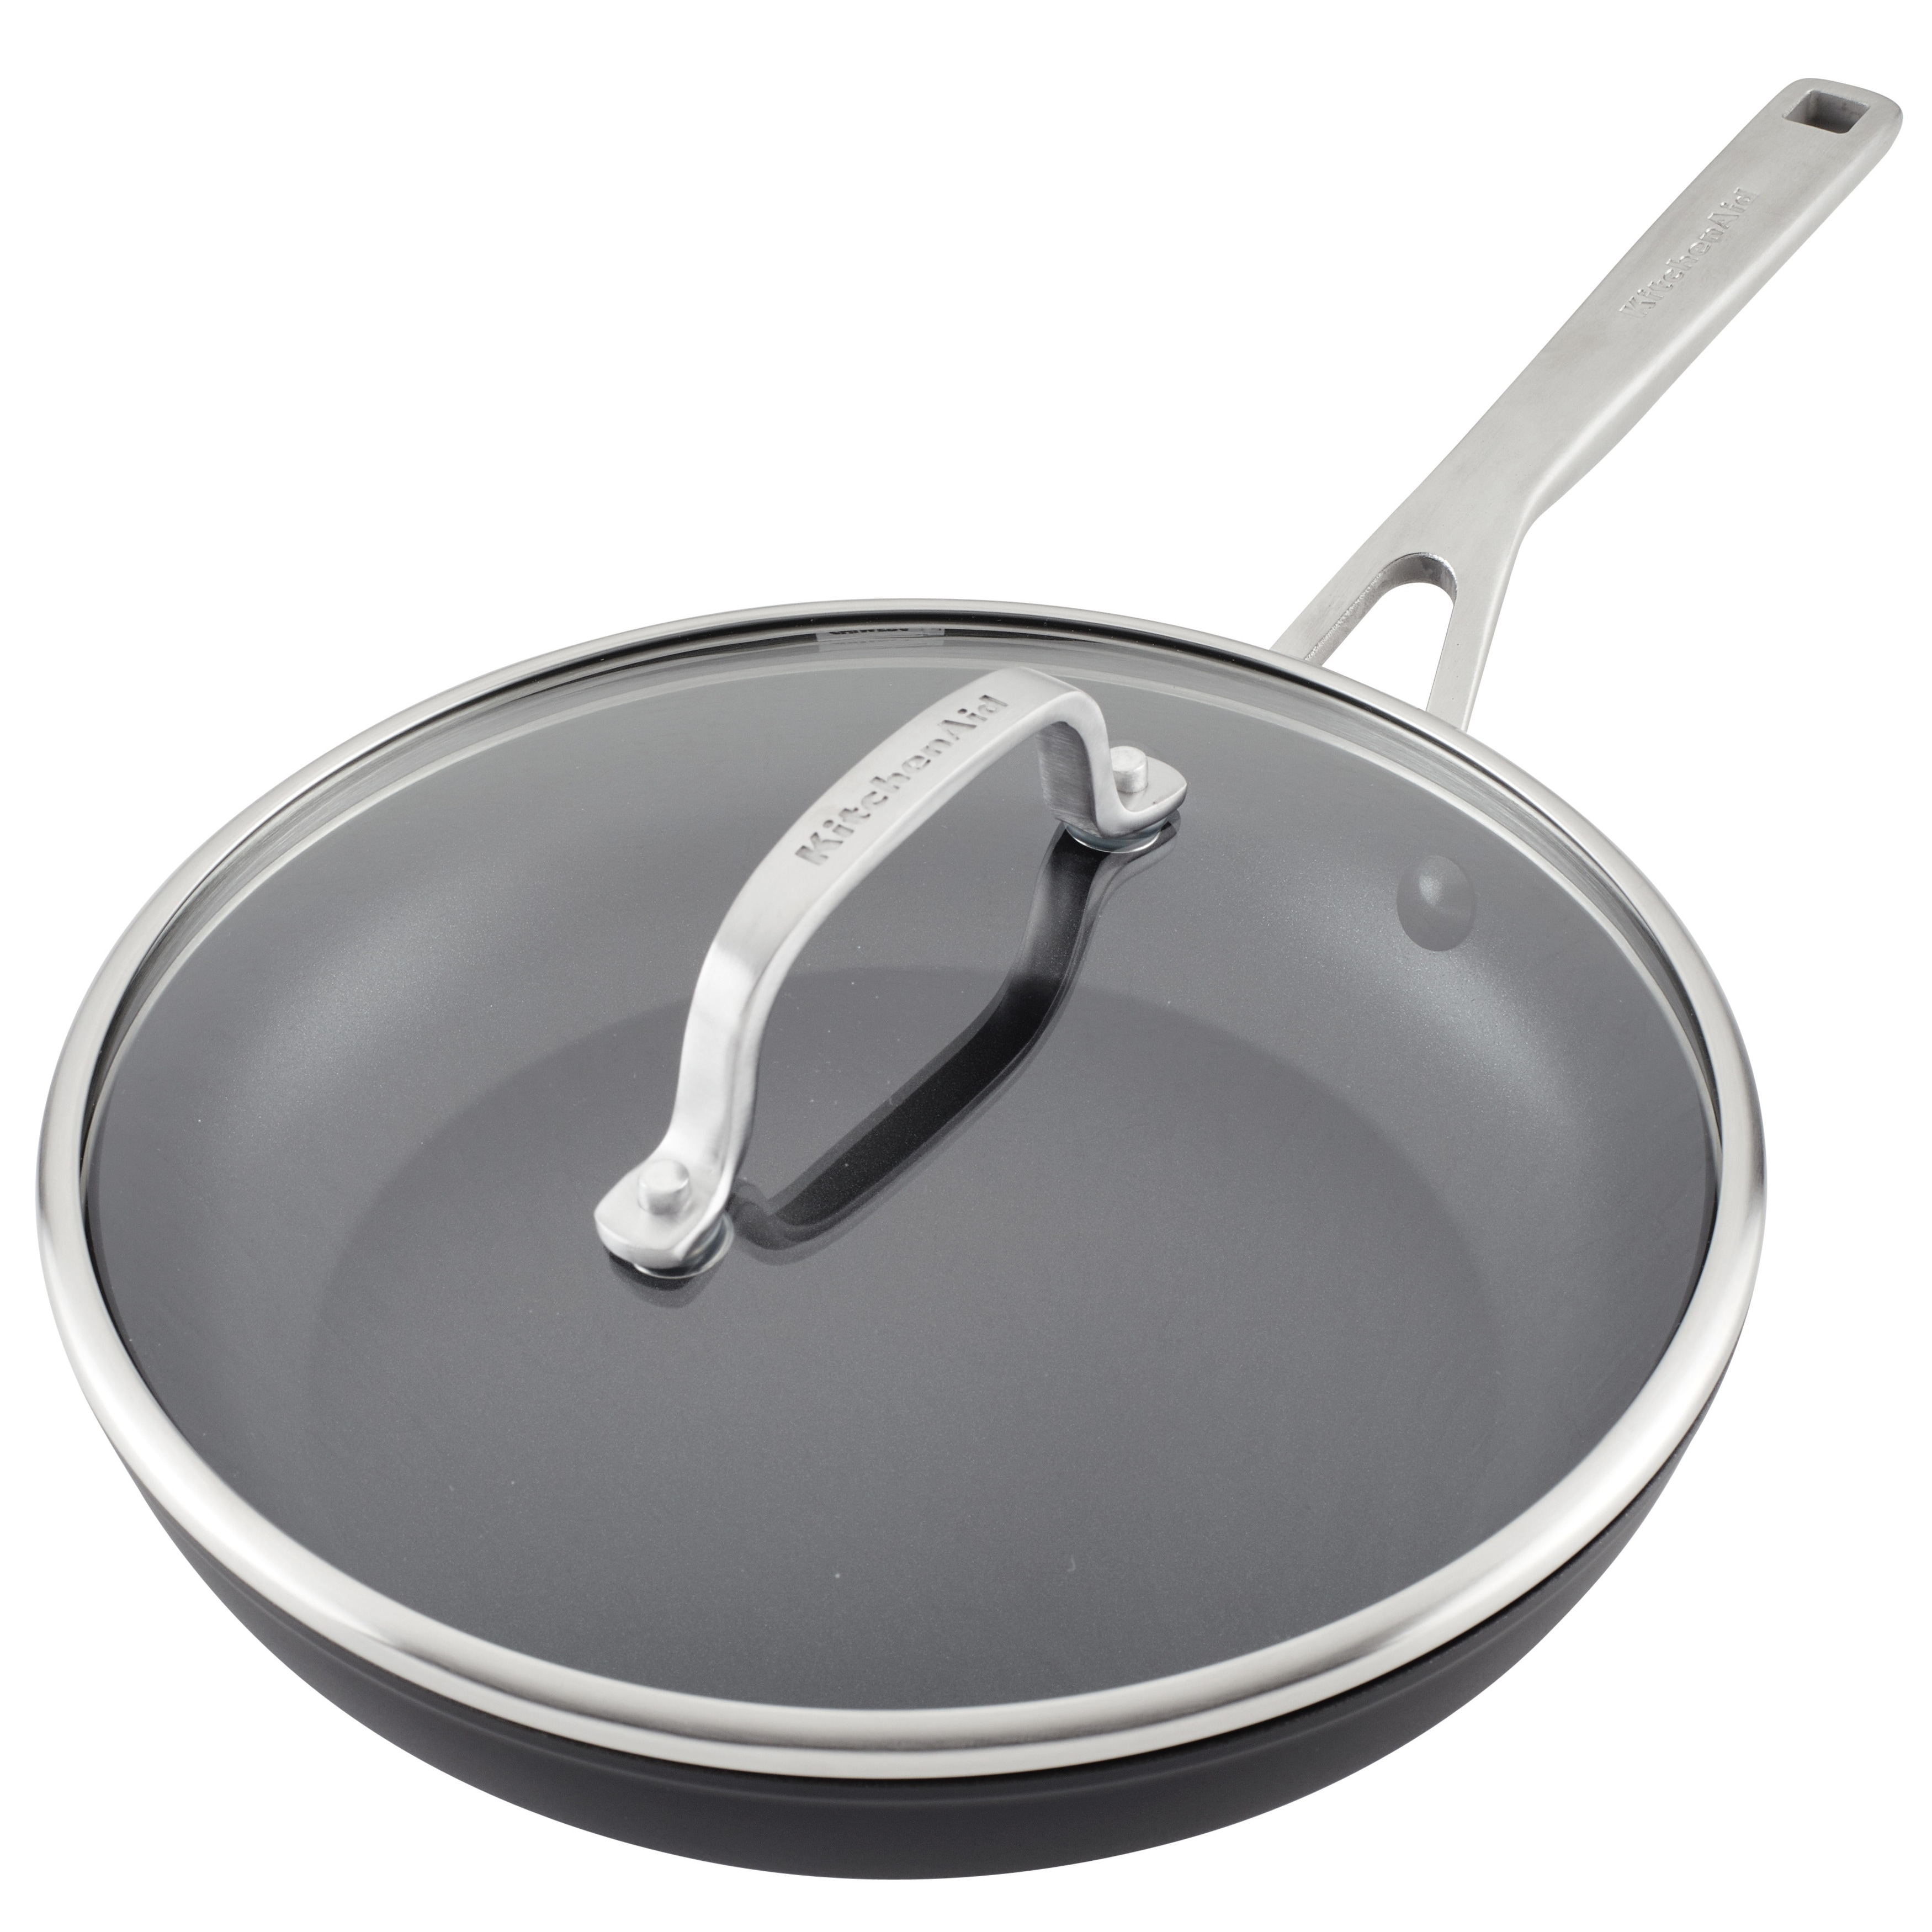 https://ak1.ostkcdn.com/images/products/is/images/direct/5d711127191baaa0b491cd619764eb77db22e180/KitchenAid-Hard-Anodized-Induction-Frying-Pan-with-Lid%2C-10-Inch%2C-Matte-Black.jpg